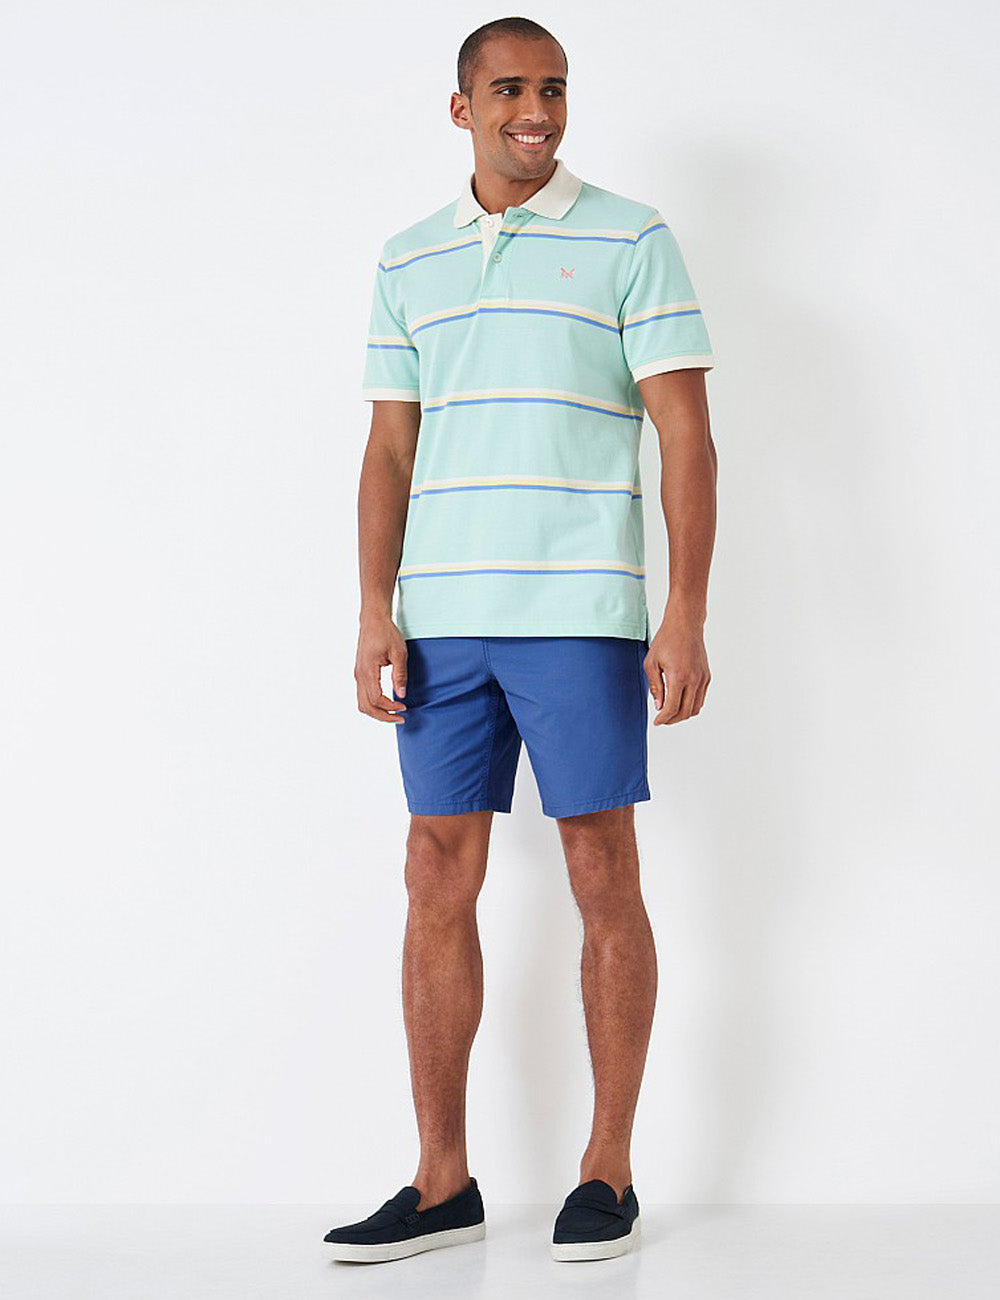 Man wearing the Bermuda Shorts with a striped polo shirt